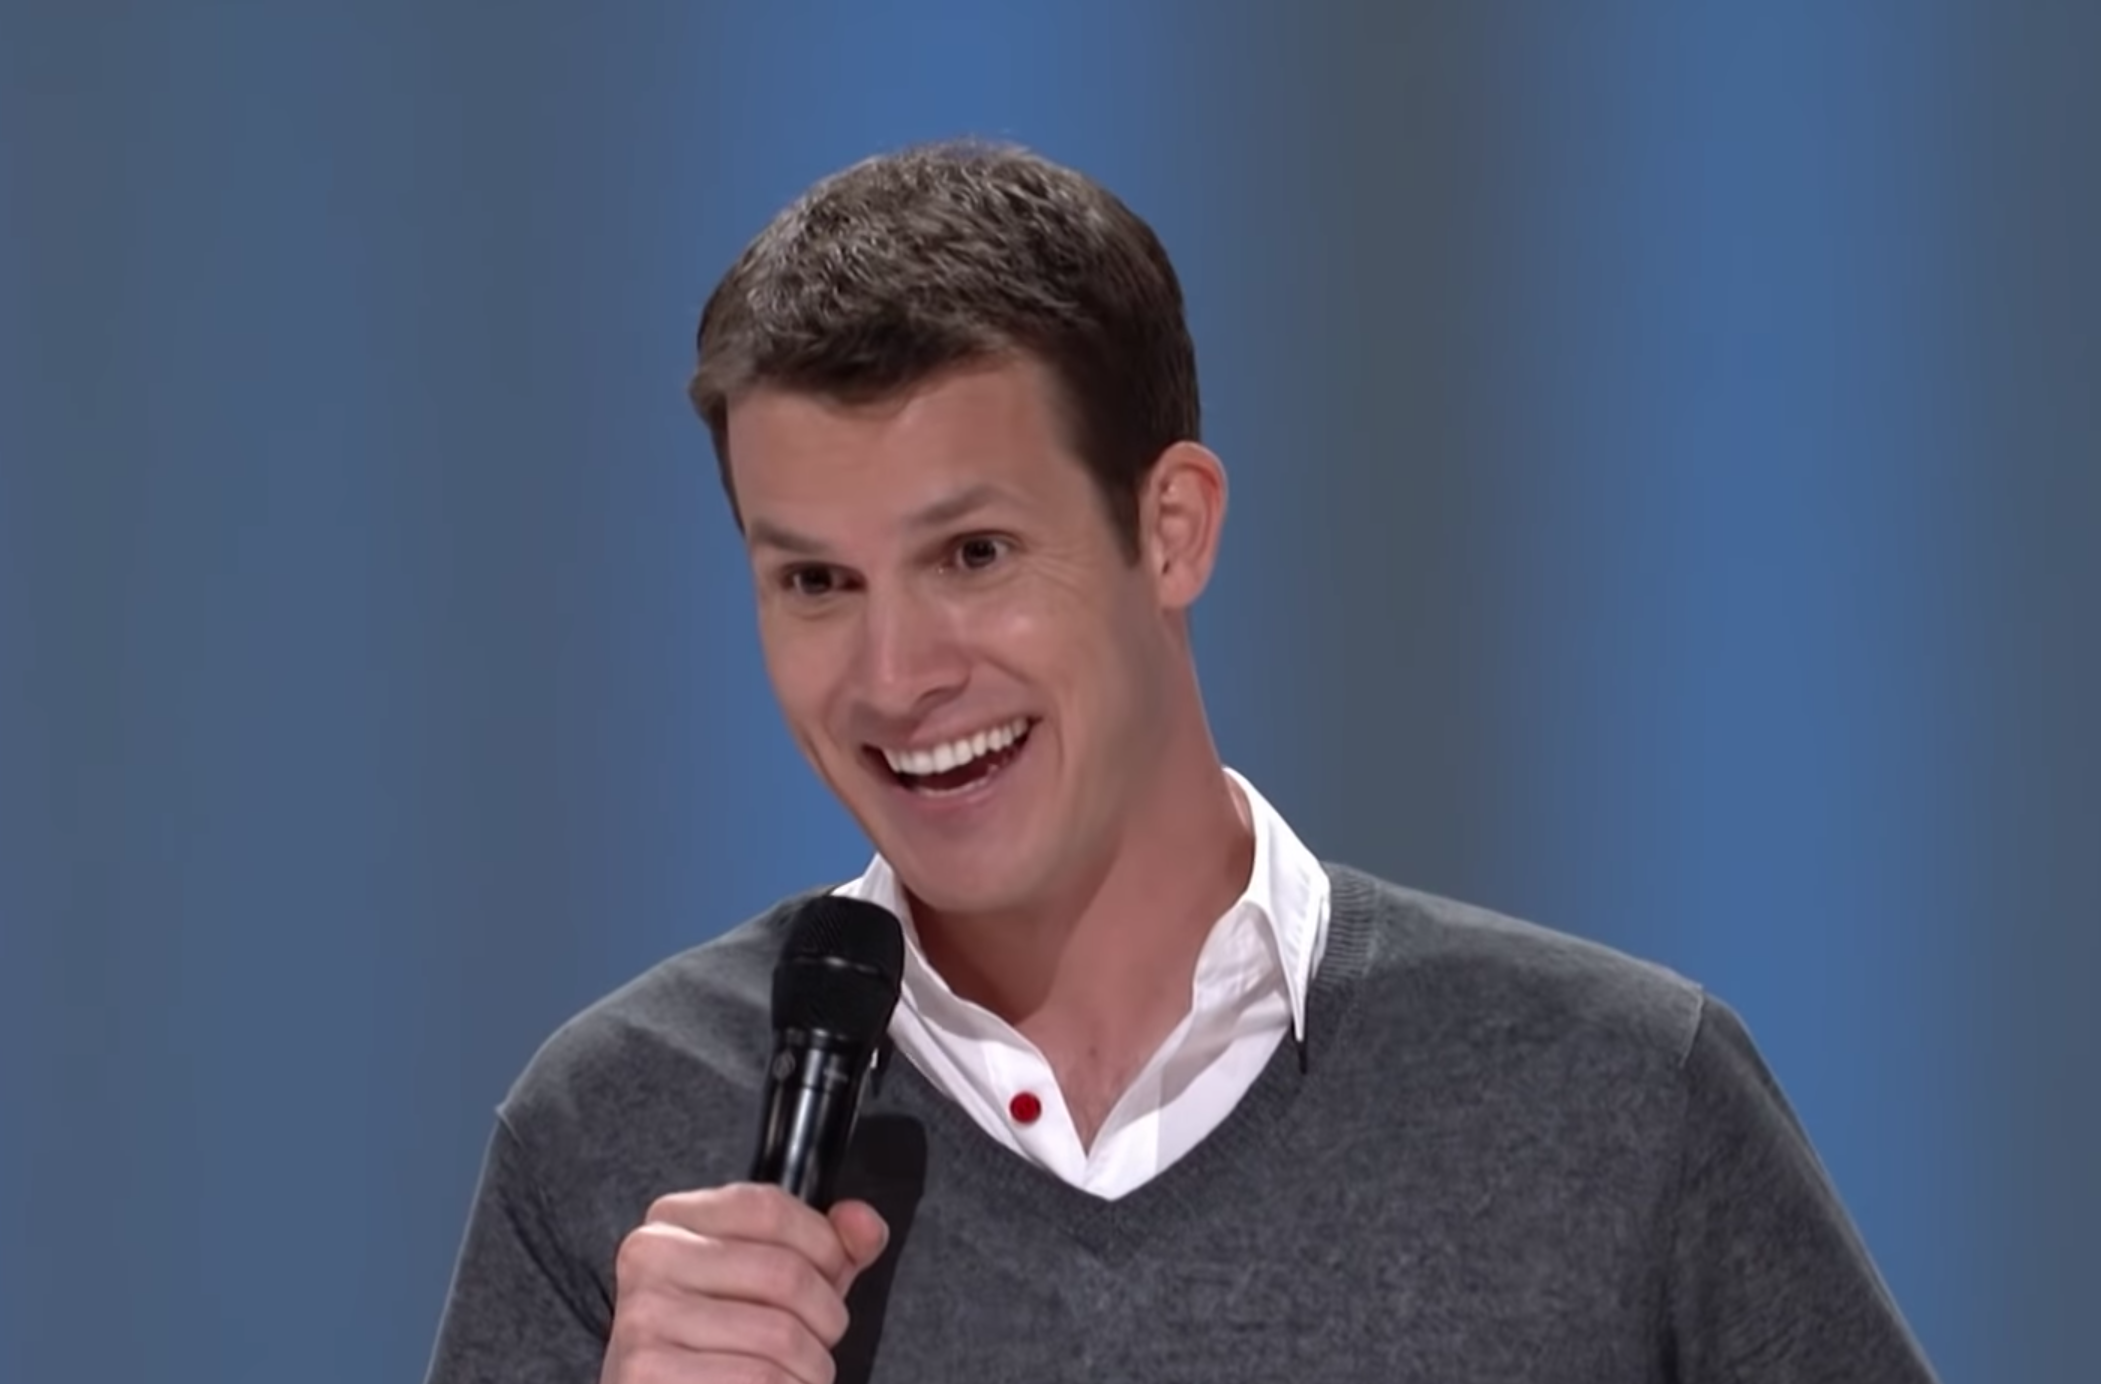 Who Is Daniel Tosh's Wife? Everything About Carly Hallam